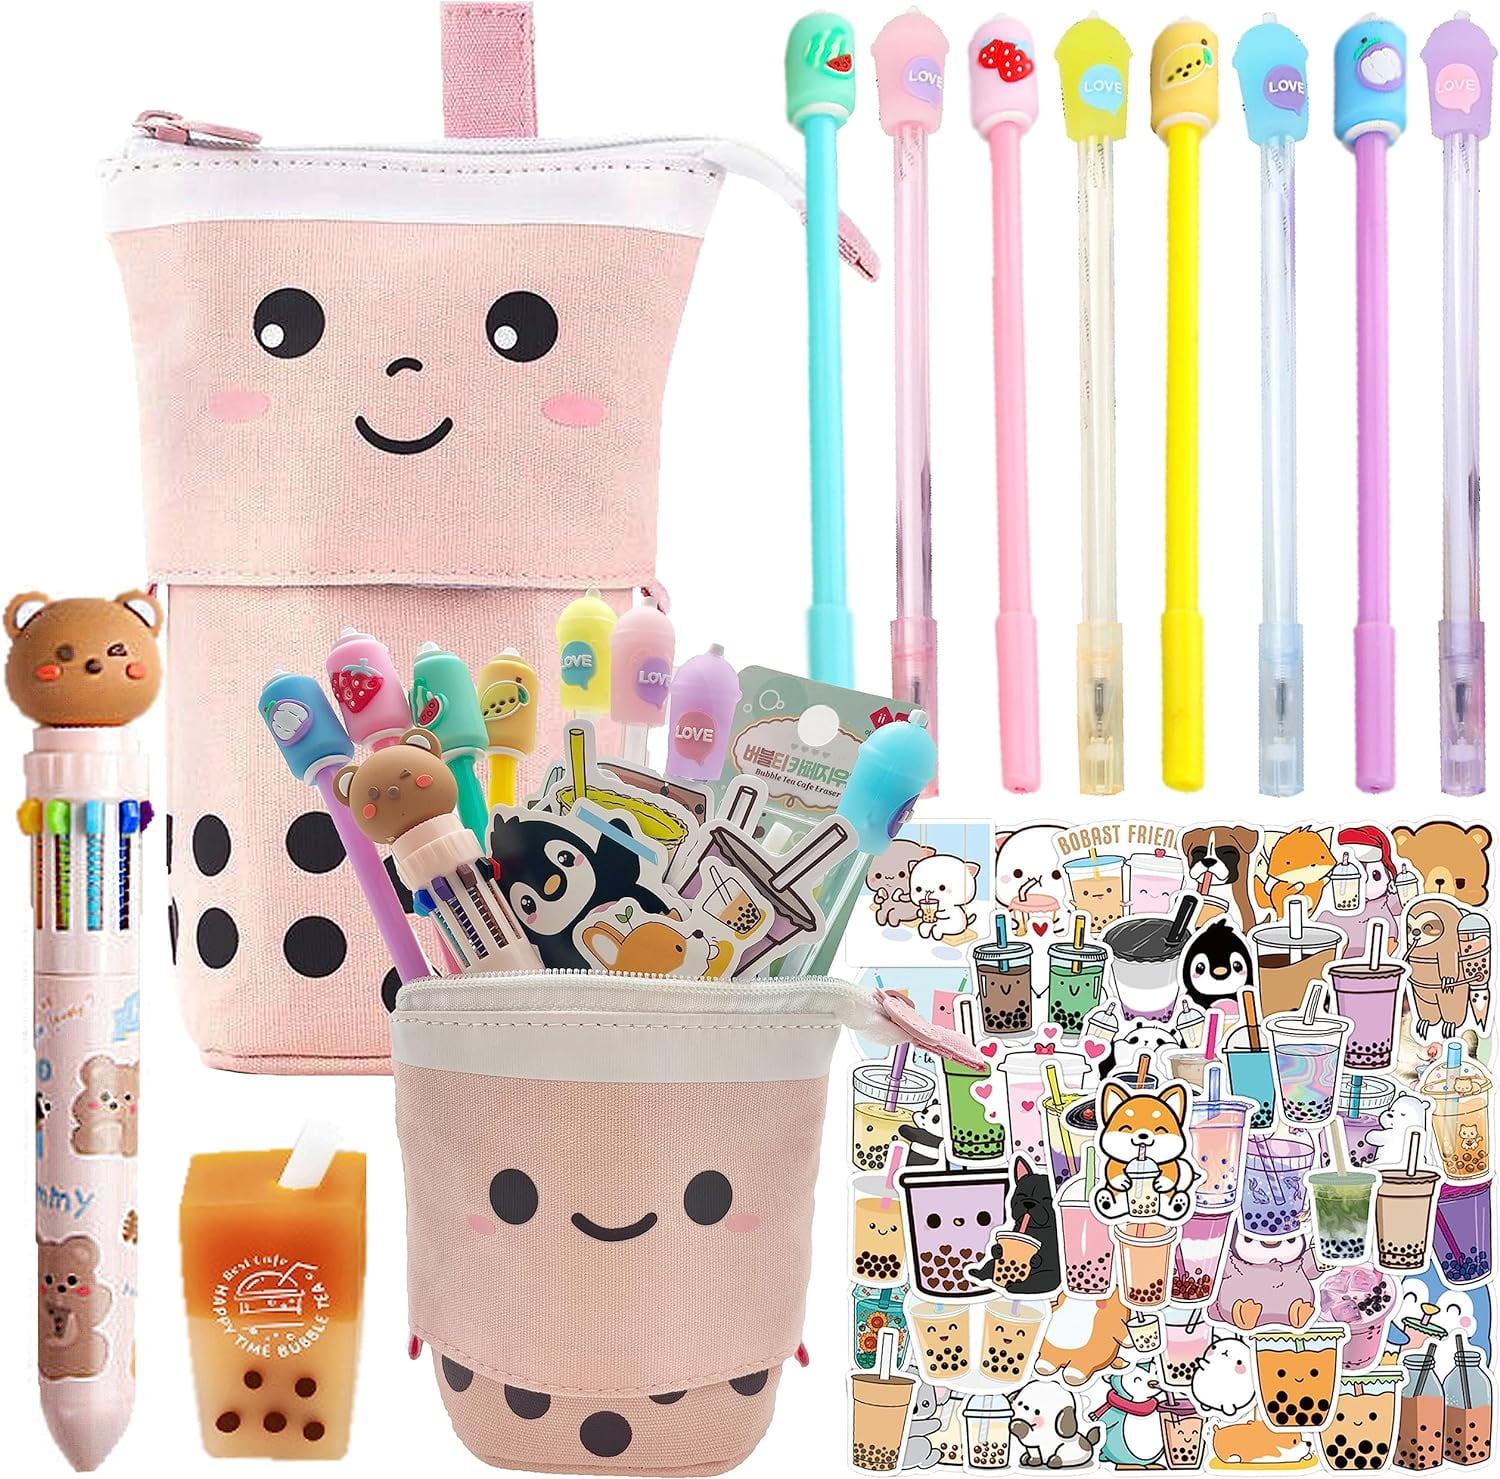  228 Pcs Kawaii Boba Stationery Set - Gel Pens, Pencil Case,  Stickers, Highlighters, Notes - Cute School Supplies : Office Products